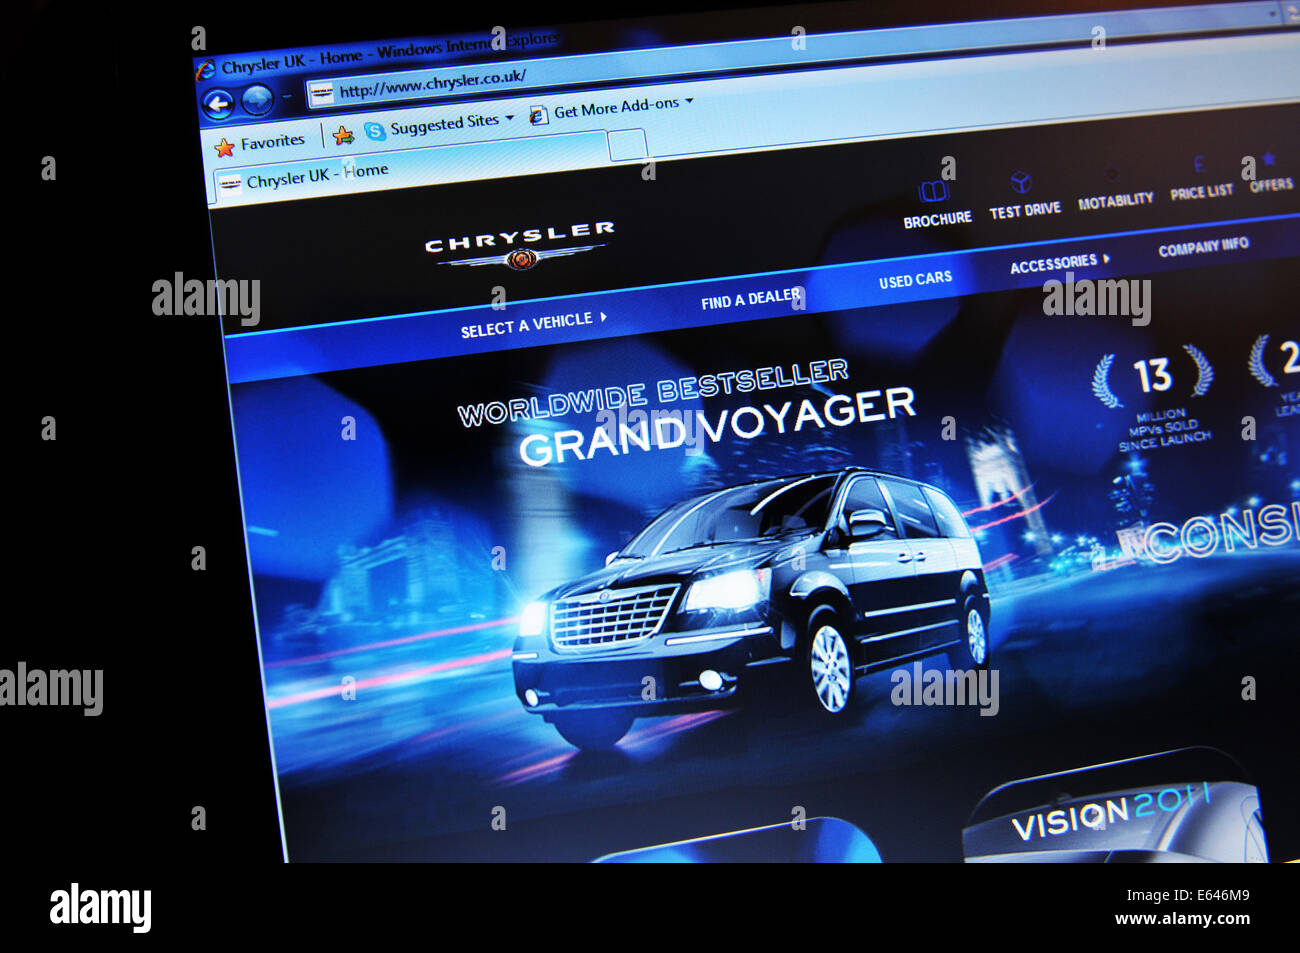 LONDON, UK - FEBRUARY 3, 2011: Close up of Chrysler automobiles official website on laptop screen Stock Photo